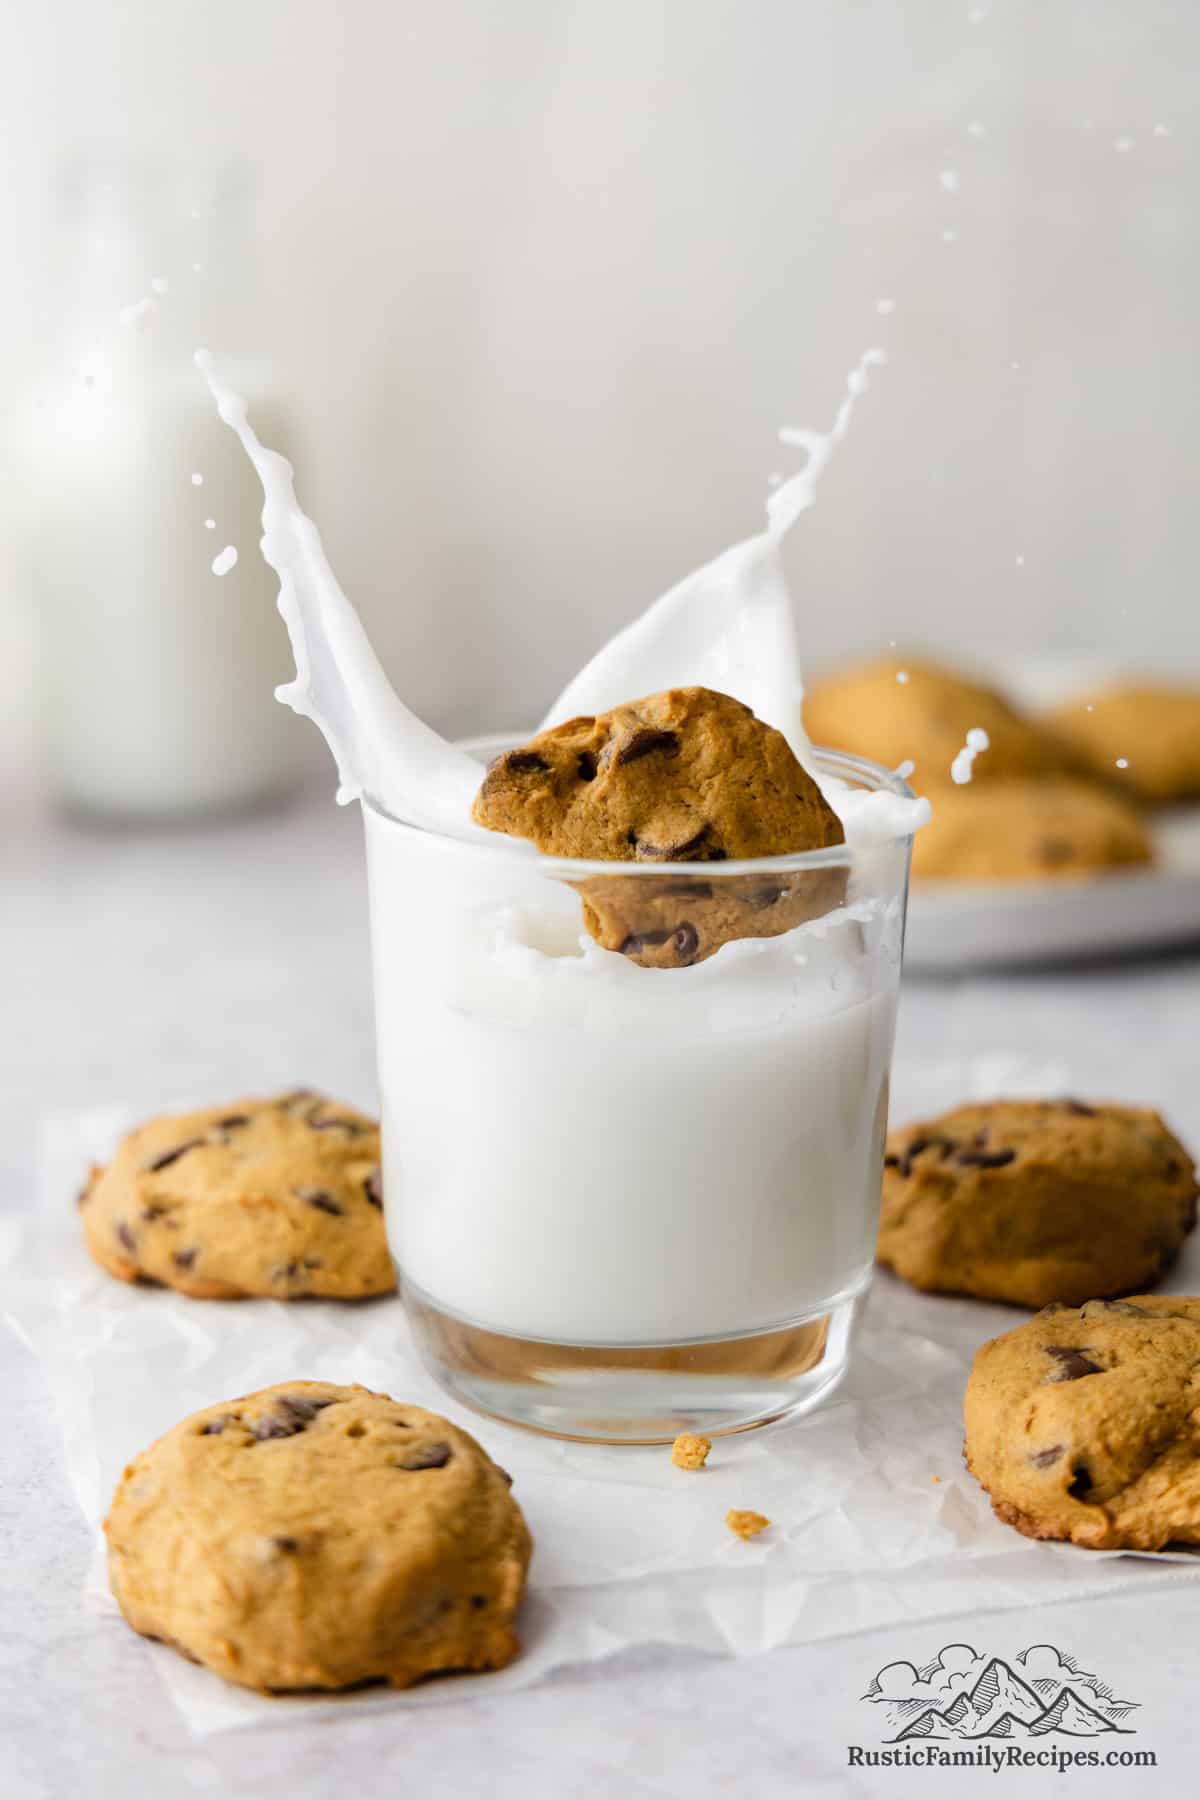 A pumpkin chocolate chip cookie is dropped into a glass of milk, causing the milk to splash.